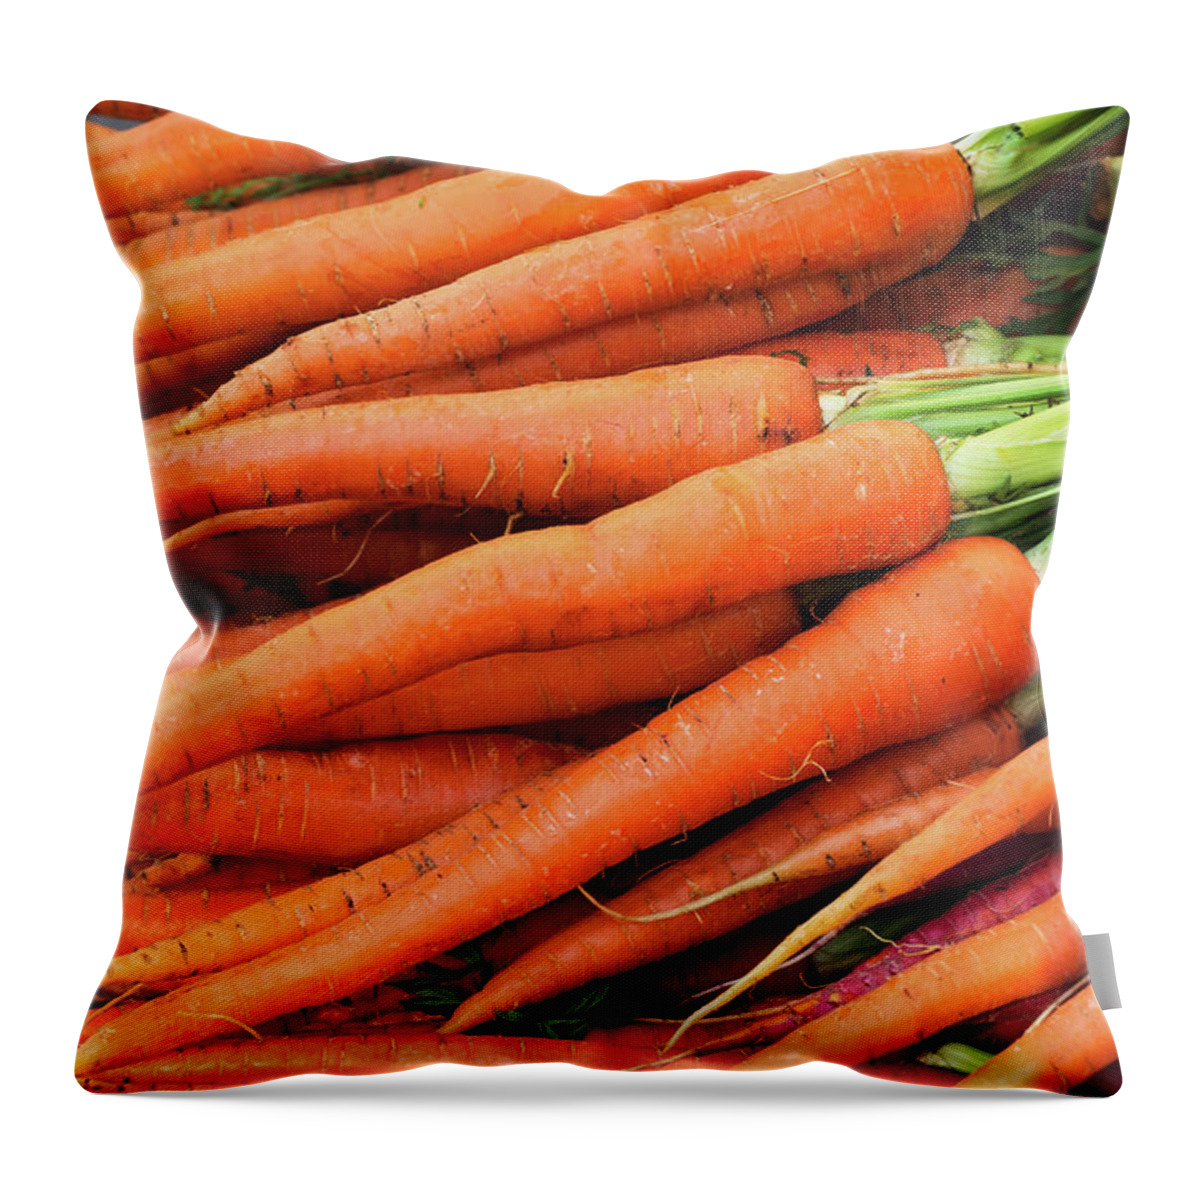 Orange Color Throw Pillow featuring the photograph Usa, New York City, Fresh Carrots by Tetra Images